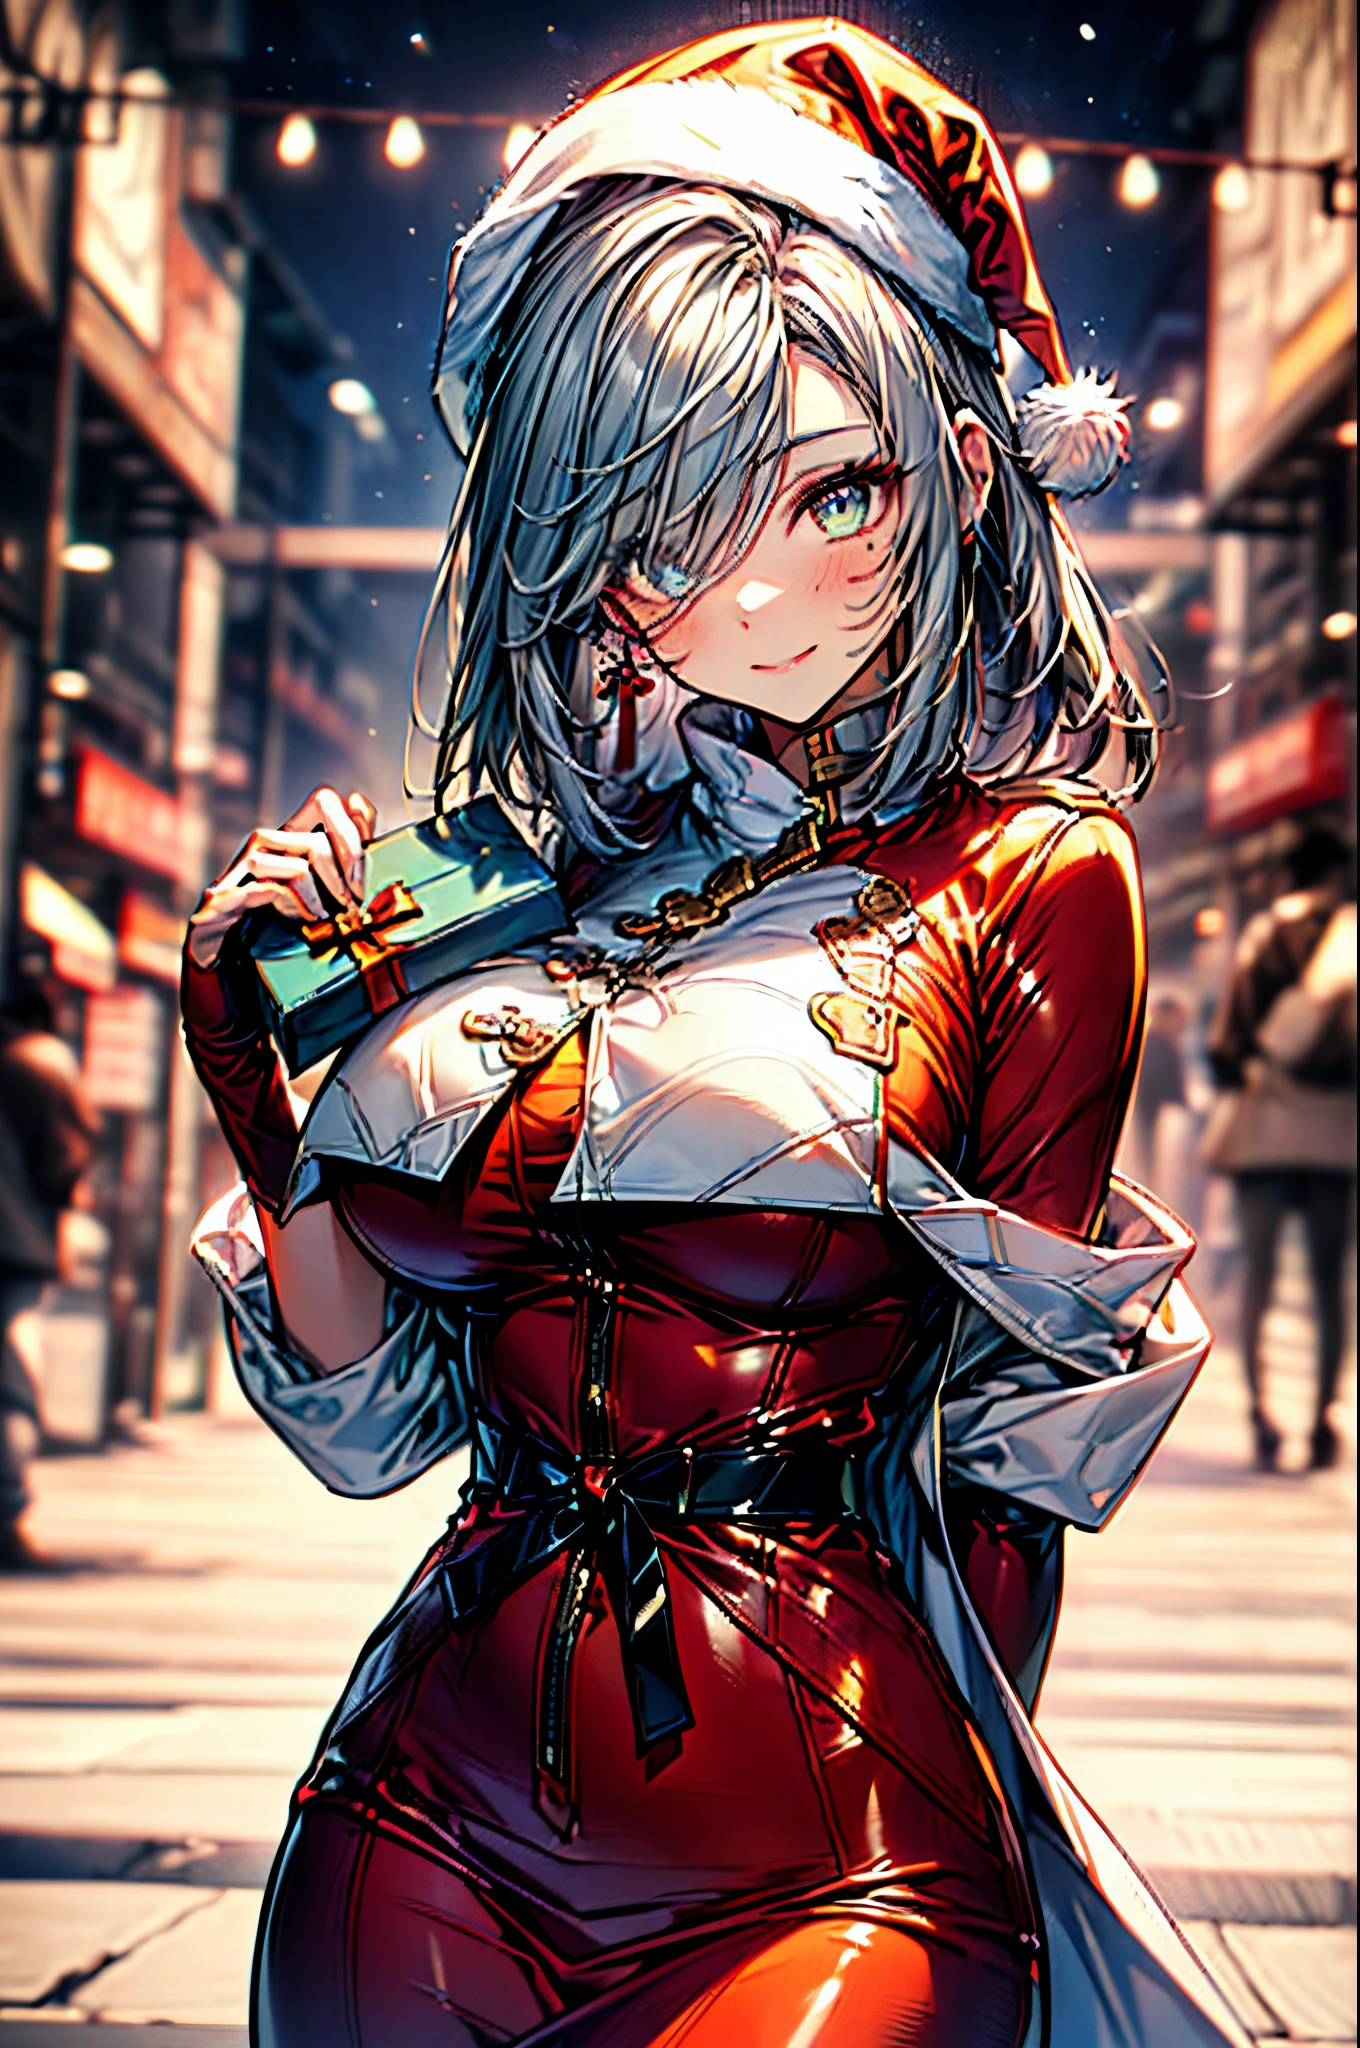 (Conceptual image board:1.3), ((matured girl wearing Sexy Santa clause costume with far:1.3, red dress with green, holding a present box in both hands to give viewers:1.2, close to viewers:1.2)), a matured woman with long black hair and a red outfit, red winter coat with bore, scarfs, green ribbon tie, knee length long boots, red and green winter outfits, holding present box with wrapping by ribbon:1.5, Christmas tree decorated with many ornaments:1.2, white bags on a sled, wearing red pencil skirt, Arabic, bodyesbian, fine details, beautiful anime illustration, 28 years old, (milf:1.3), (solo:1.5), (sfw:1.25), (sagging breast, fuge breasts, big , thin waist, big ass:1.2), Raised sexy, (dark mahogany medium short hair, updo, hair over one eye, asymmetric hair, Carly hair, low tied braids), (musulman, white Headscarfs, hair bands, head vandage, Turban), (ultra high resolution, 8K RAW photo, photo realistics, thin outline:1.3, clear focus), best qualtiy, cinematic lighting, textile shading, blurry back ground, field of depth, bokeh, (Bright pupils, fine detailed beautiful eyes with highlight:1.3, super detailed eyes, high detailed face), Red lip, fine realistic skins:1.1, looking at viewers:1.3, (dynamic angle:1.3, full body:1.3, front view:1.1, tigh focus:1.3, from below:1.2), (dynamic posing:1.5, sexy posing:1.2, sitting with holding knees:1.3, leaning forward:1.2), (seductive, shy happy smile:1.4), centered image, (wearing red long coat with bore and clothes, ((bare breast:1.37)), gold ornaments, rolling red clothes around waist, dark red long leather boots:1.3, translucent white lace pantyhose), (((correct anatomy:1.5, perfect hands:1.5, ideal ratio body proportions:1.37))), (in a night:1.3), (in snow field:1.3, under starly sky),